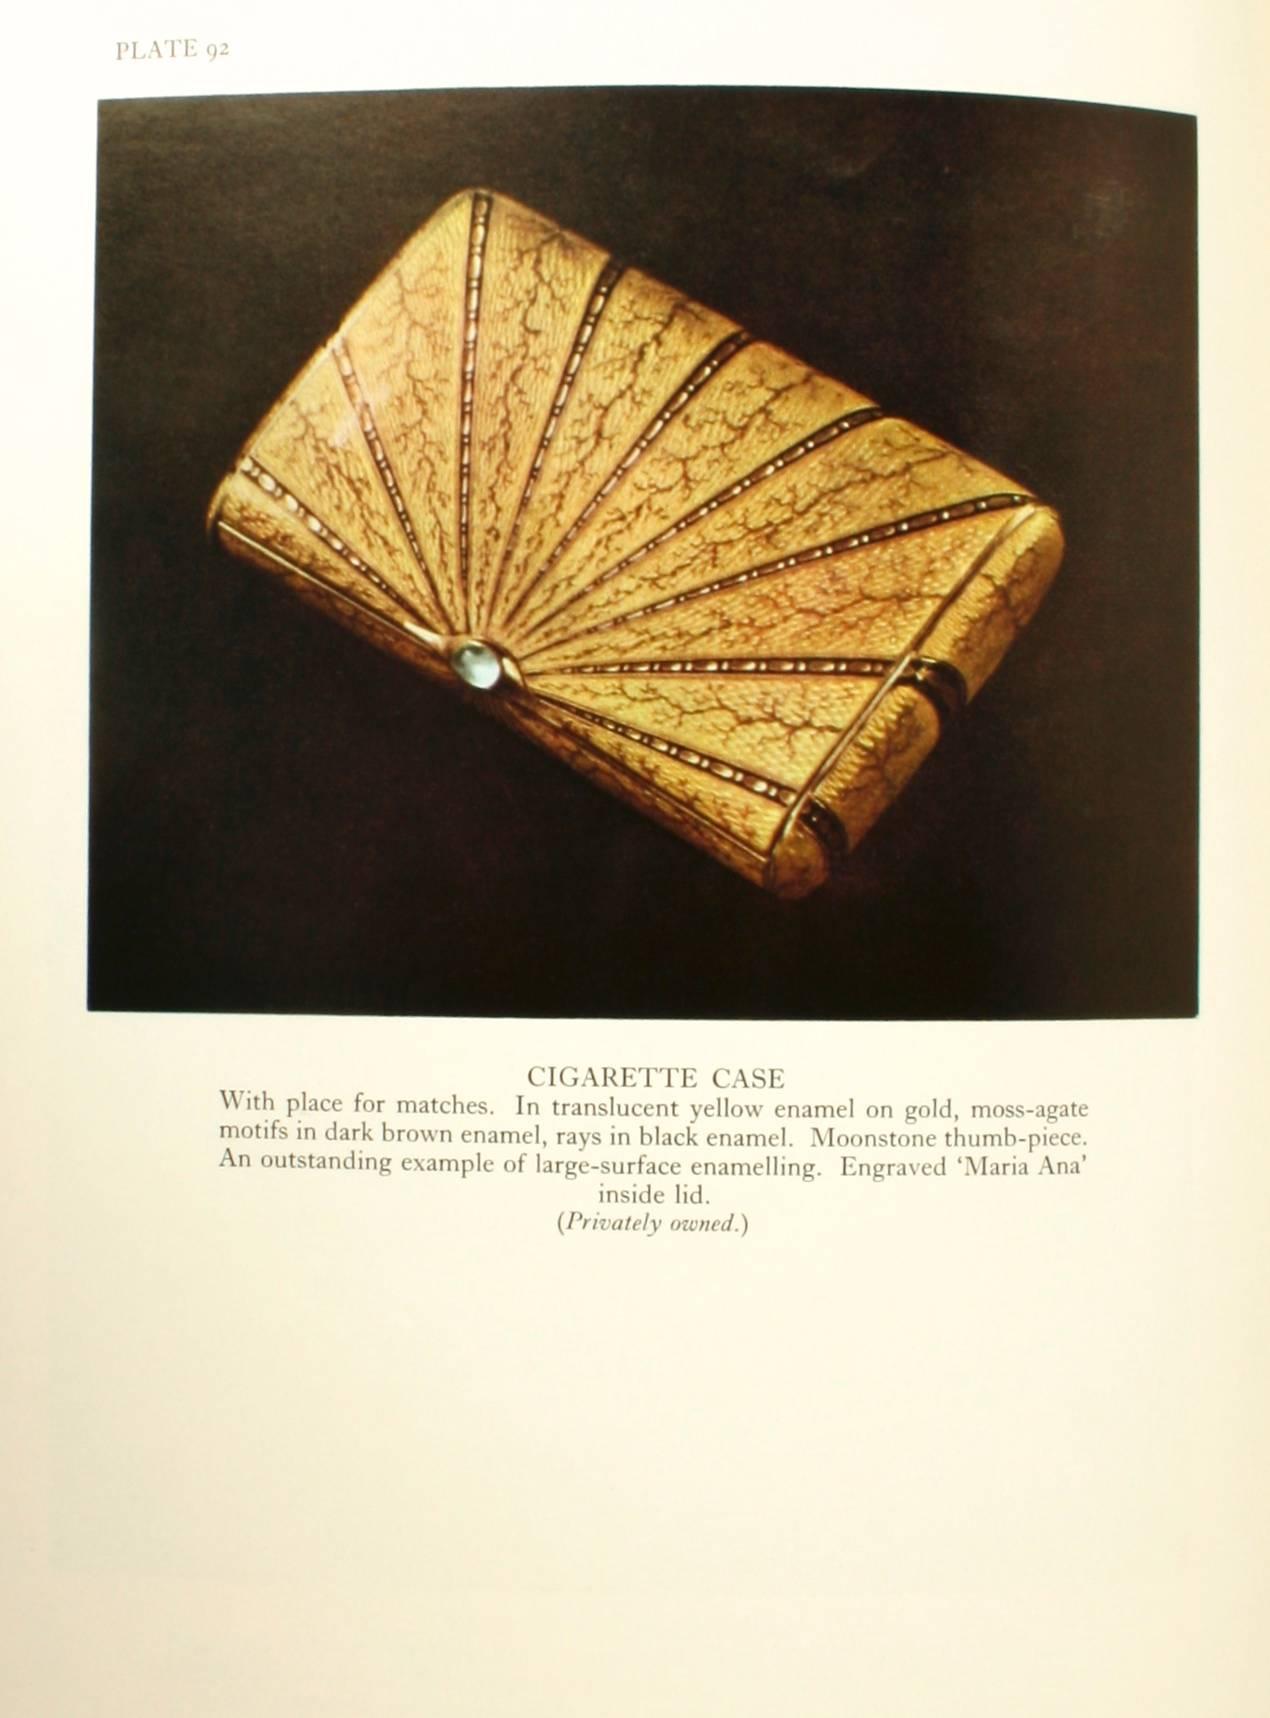 Peter Carl Faberge ‘Goldsmith and Jeweller’ to the Russian Imperial Court by Henry Charles Bainbridge. London: Hamlyn Pub., 1974. Sixth edition hardcover with dust jacket of the 1949 limited edition book. The life story and the remarkable